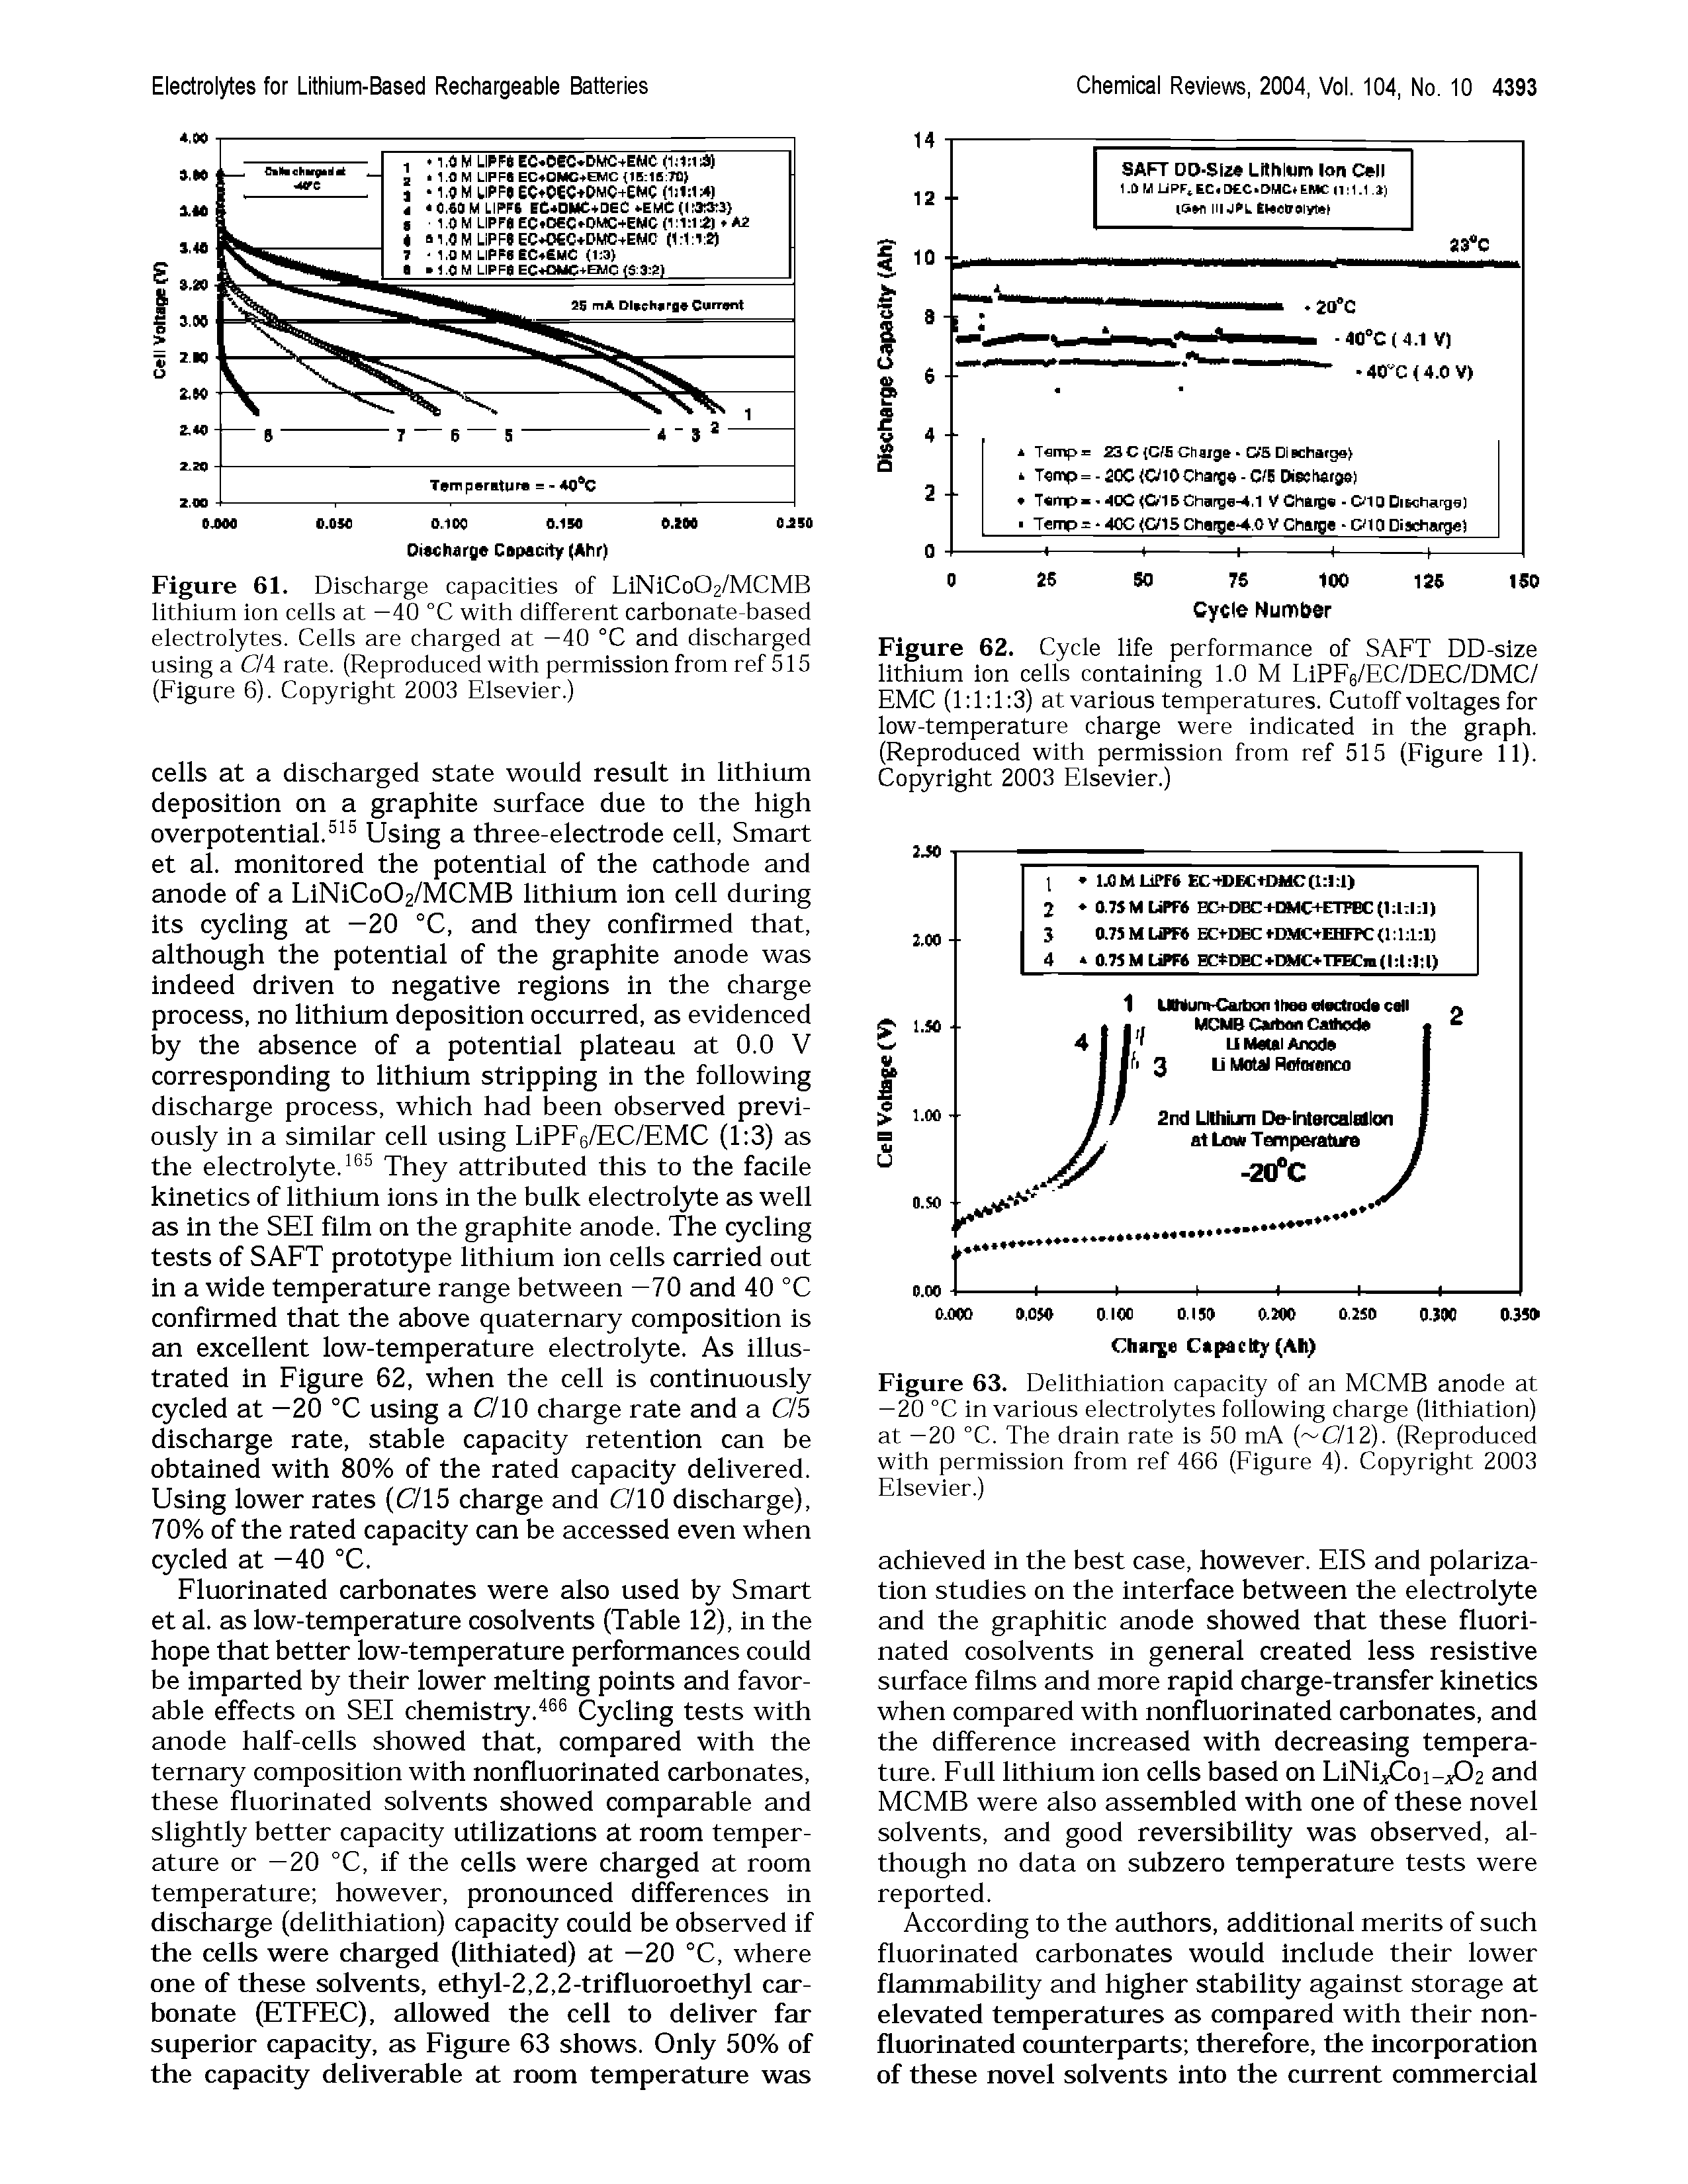 Figure 63. Delithiation capacity of an MCMB anode at —20 °C in various electrolytes following charge (lithiation) at —20 °C. The drain rate is 50 mA ( C/12). (Reproduced with permission from ref 466 (Figure 4). Copyright 2003 Elsevier.)...